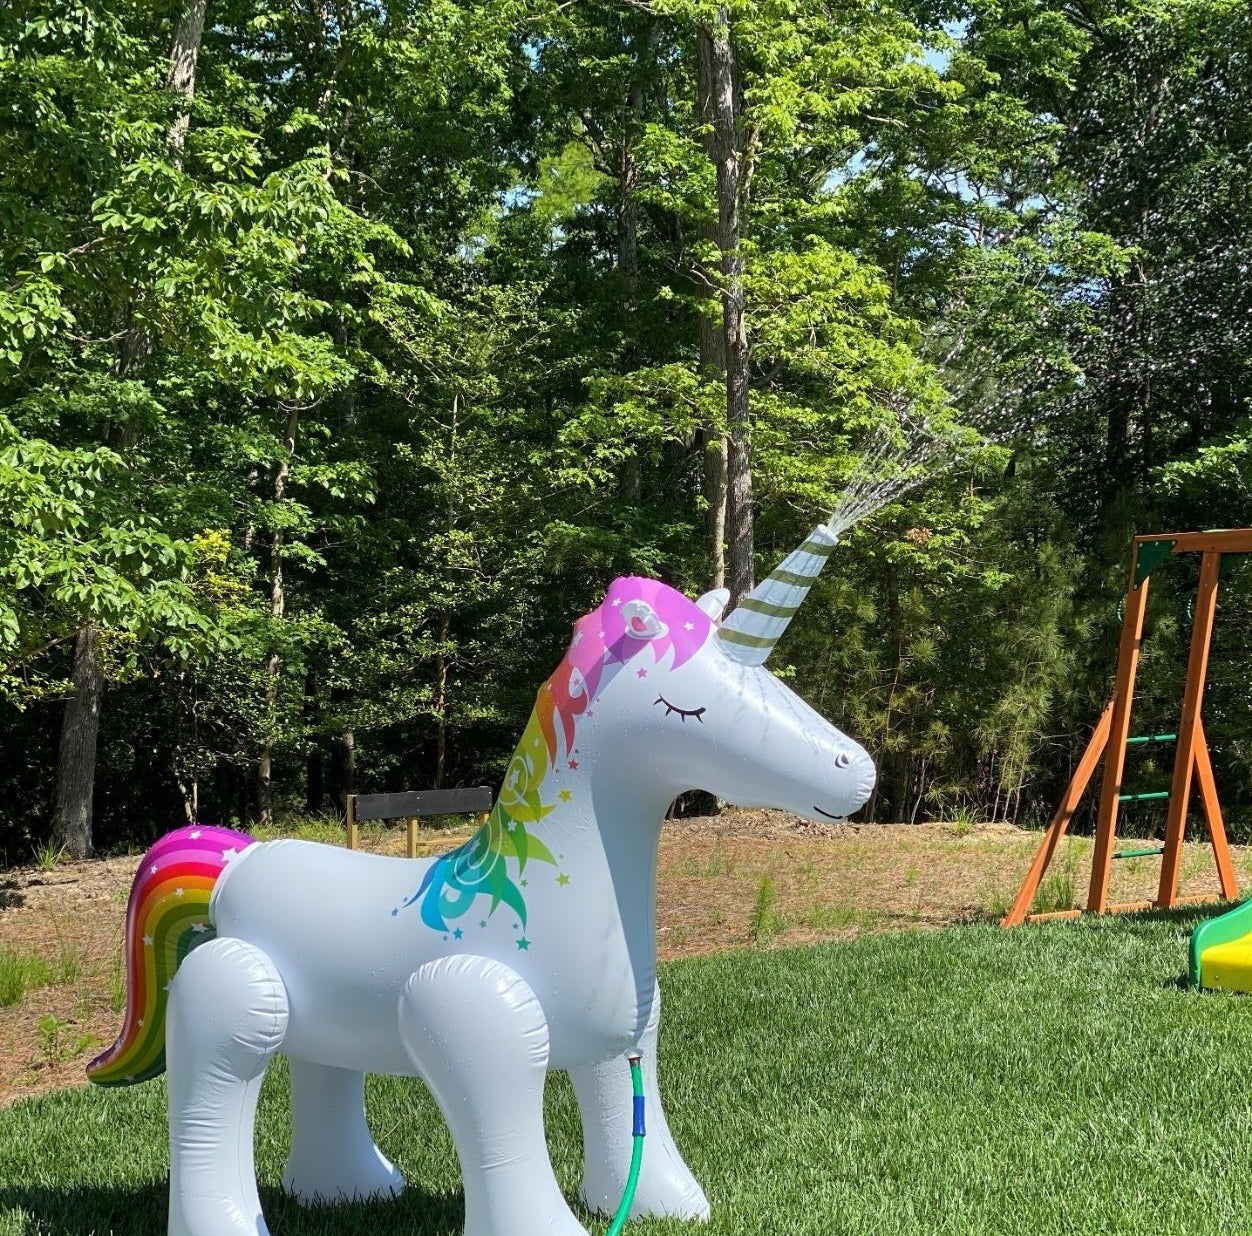 A white inflatable unicorn with multi-colored tail and mane spraying water from its horn 